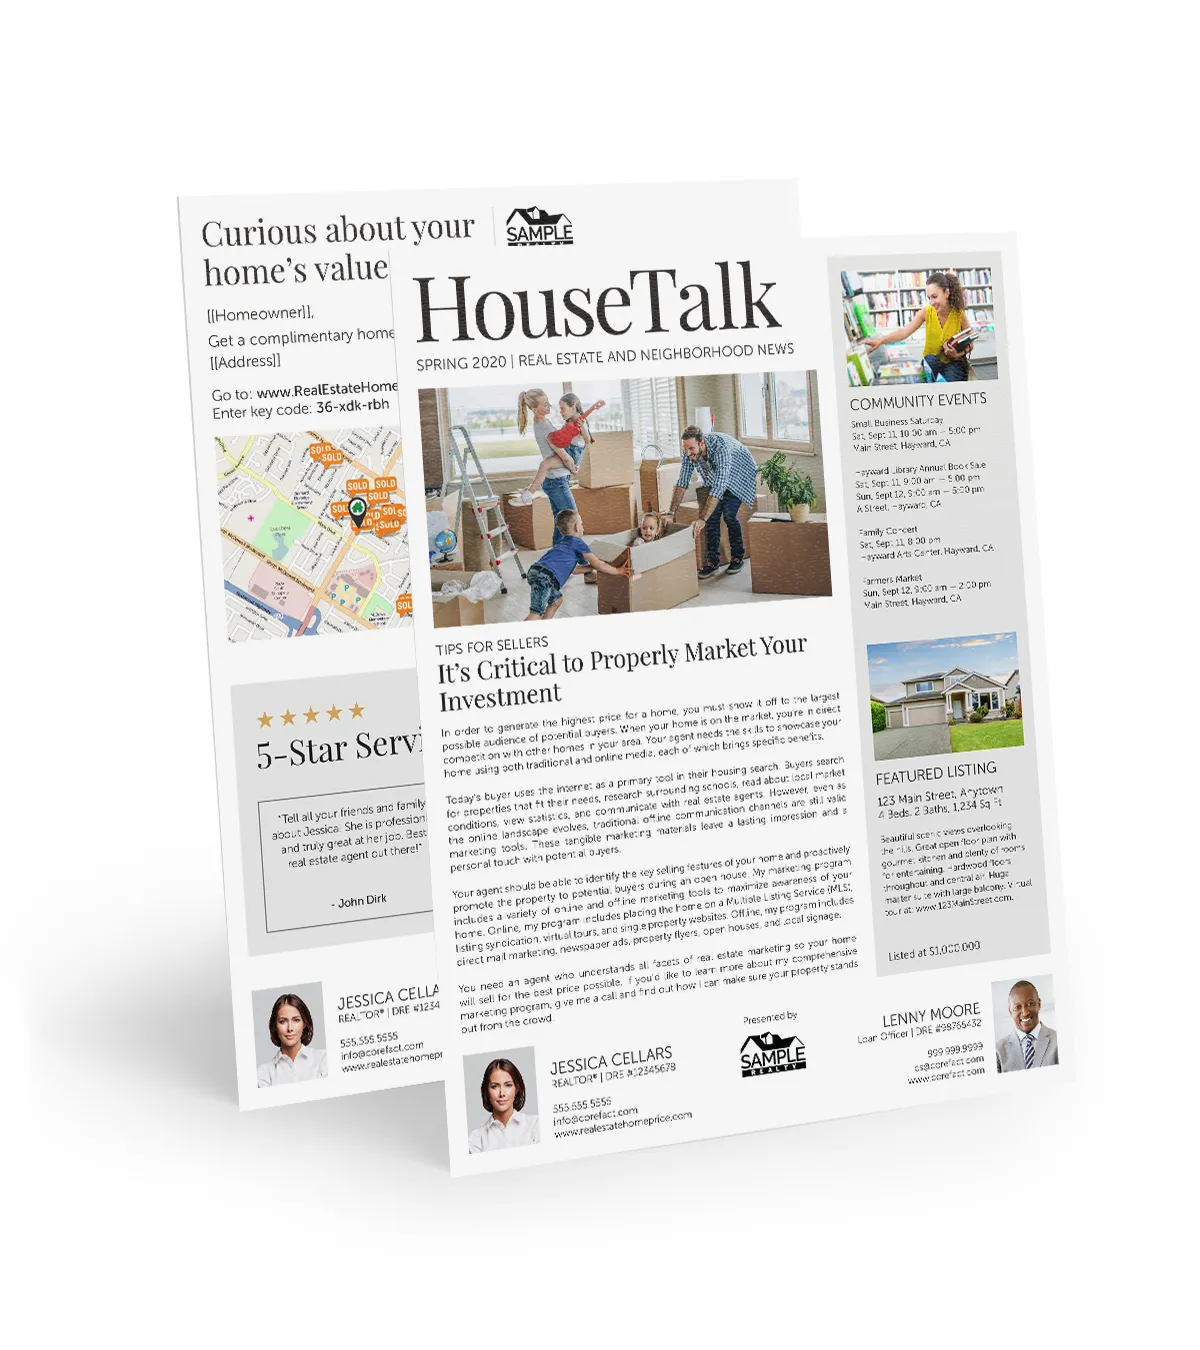 House Talk Newsletter - Marketing Your Investment (Team)